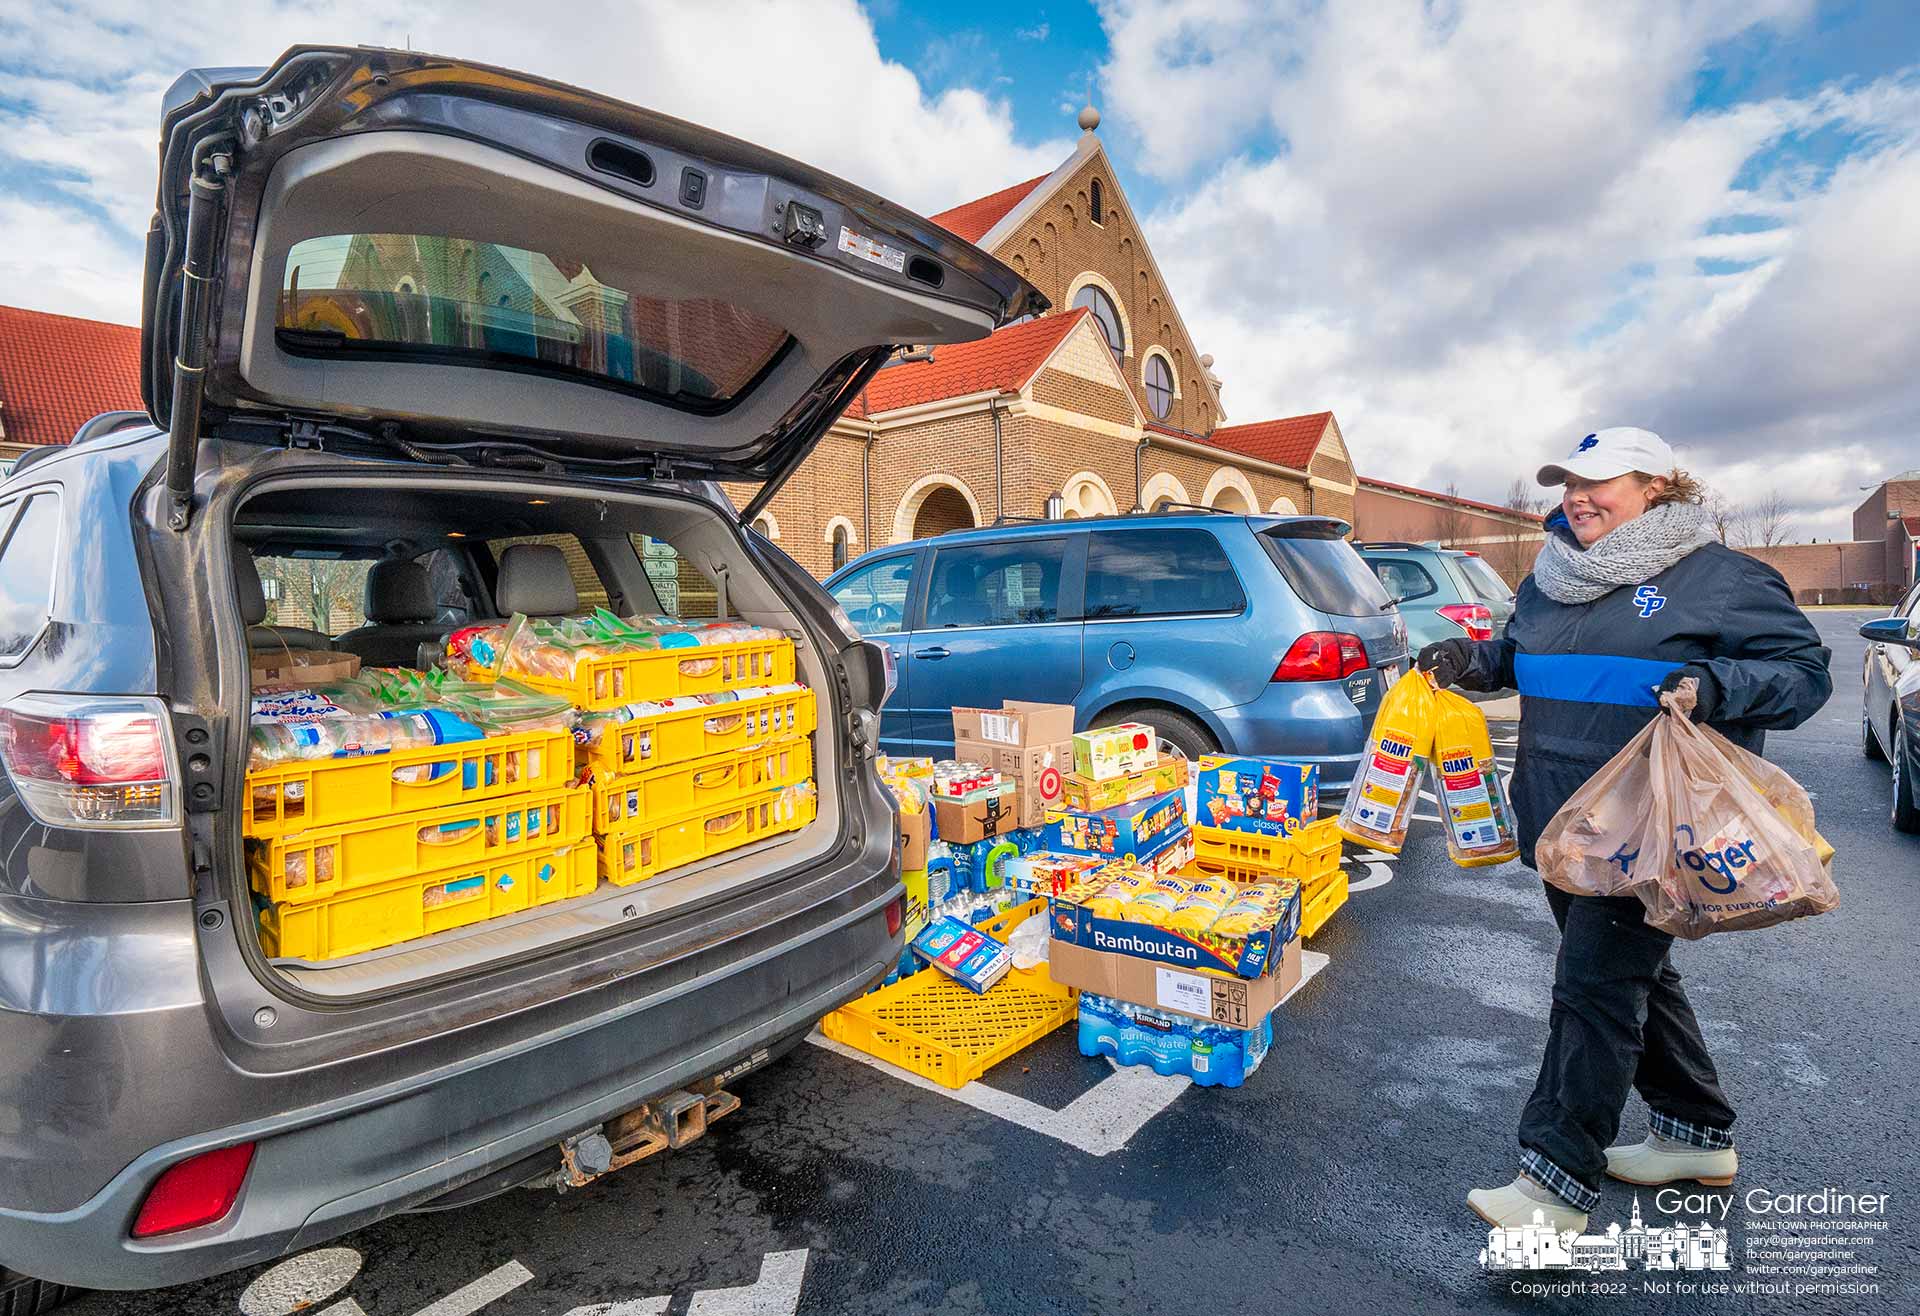 Volunteers load donated sandwiches and snacks into cars at St. Paul the Apostle Catholic Church where they will be delivered to food kitchens at St. Lawrence Haven and Holy Rosary/St. John for use during the Christmas season. My Final Photo for November 30, 2022.